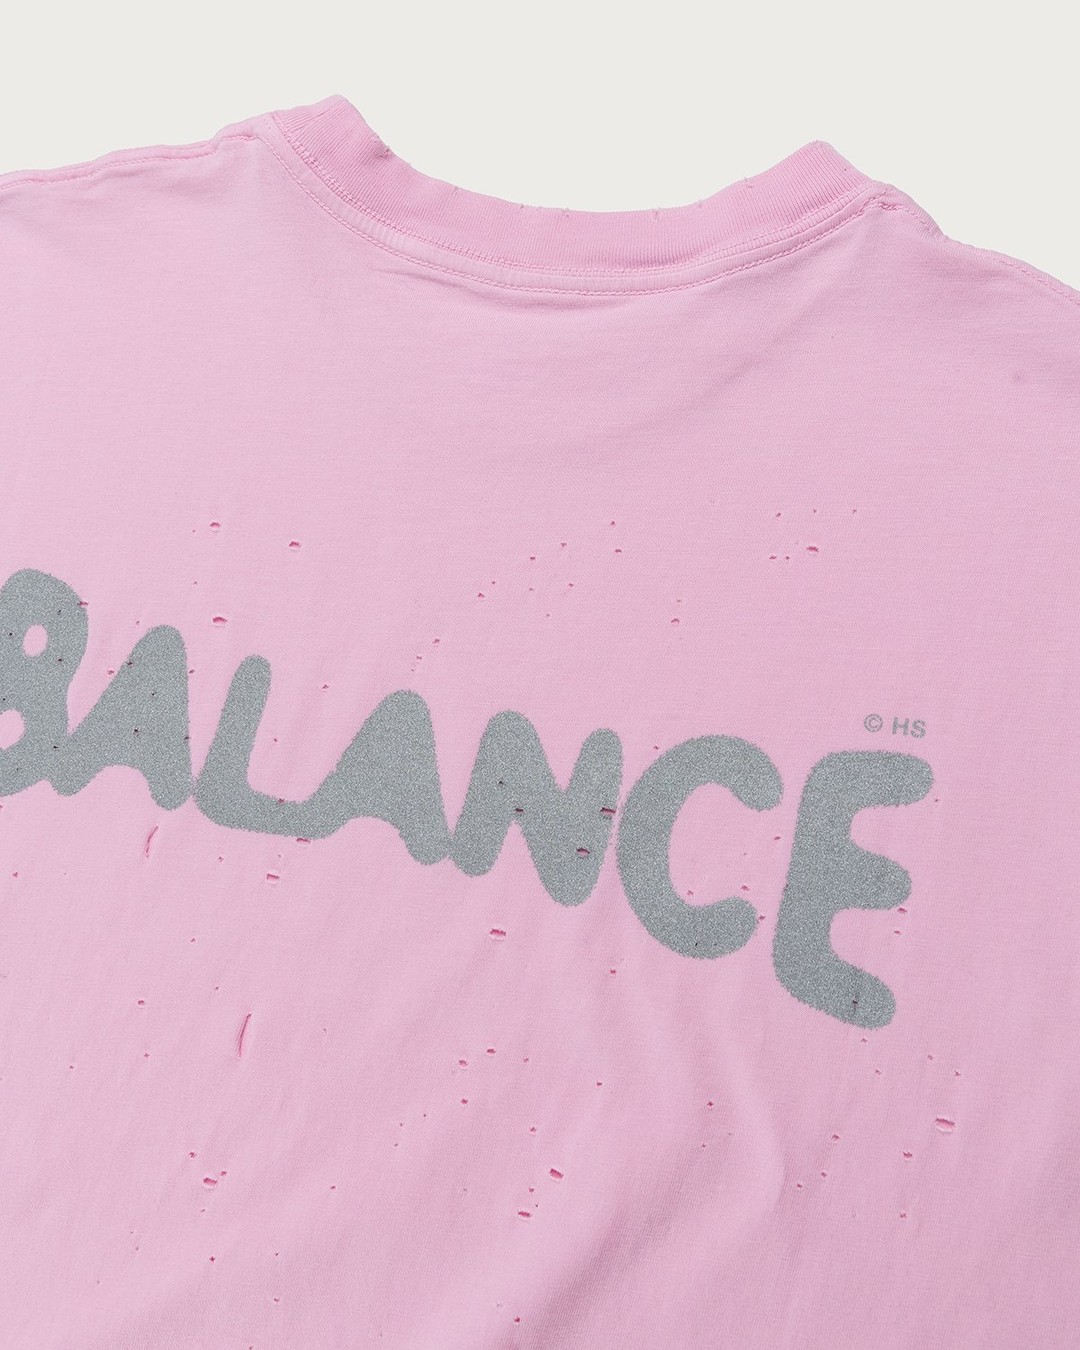 Satisfy x Highsnobiety – HS Sports Balance Muscle Tee Pink - T-shirts - Pink - Image 3